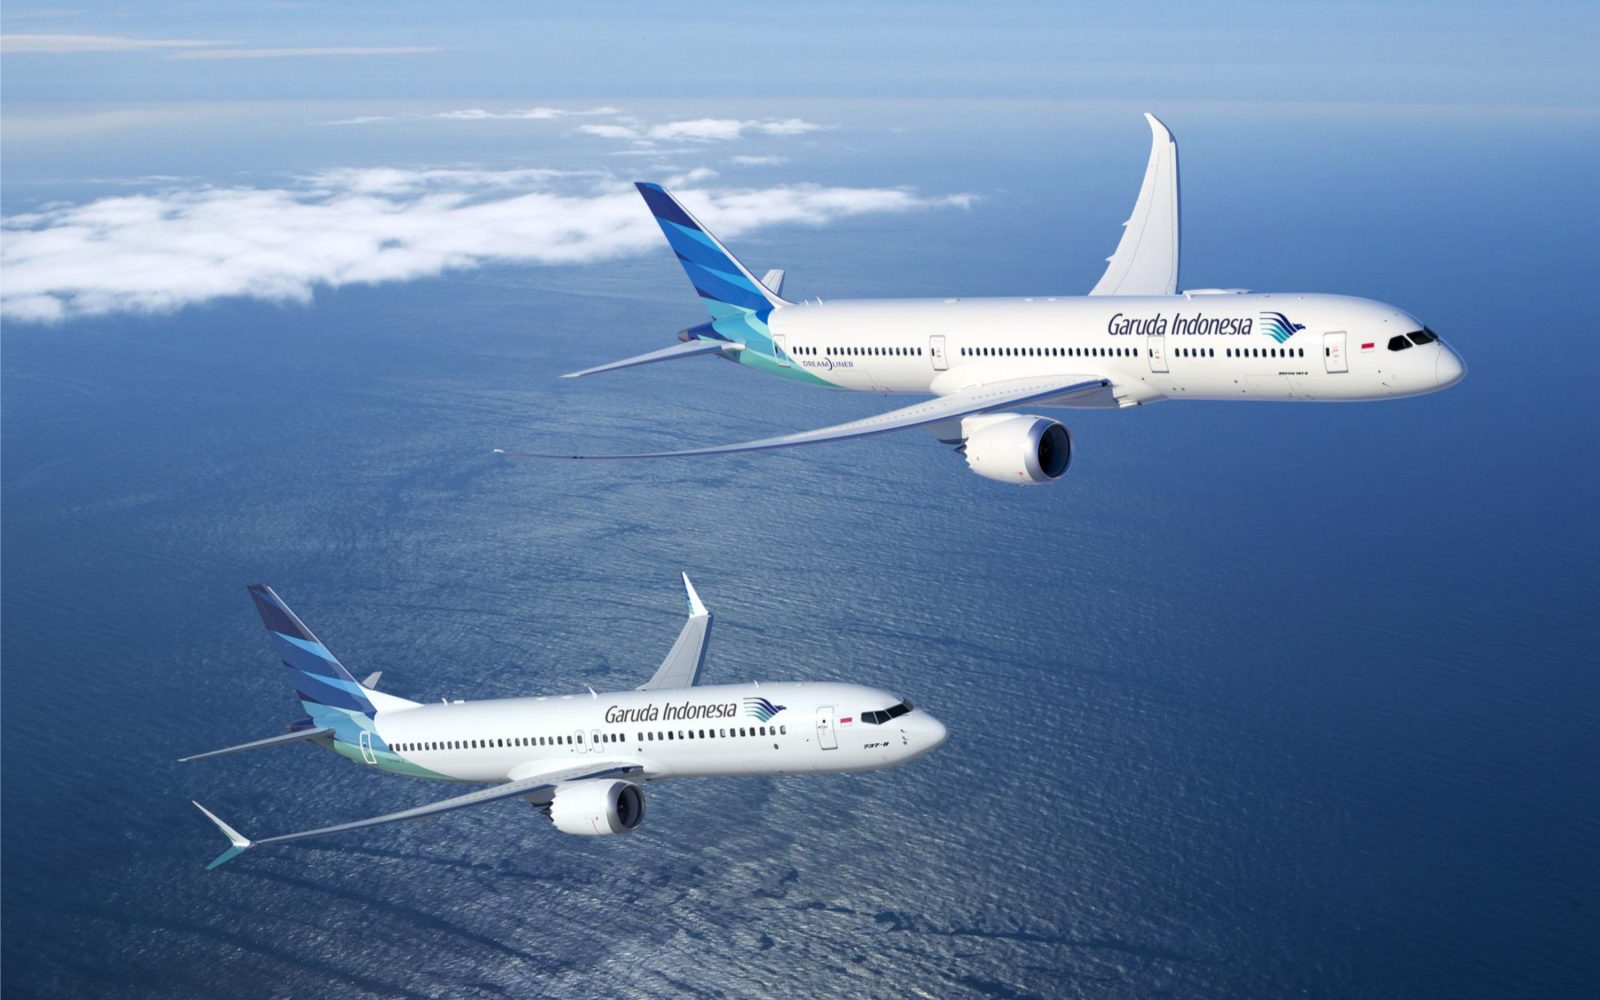 Study: Garuda Indonesia's Plan to Ditch Multi-Billion Dollar Boeing Order Doesn't Make it a Safer Airline